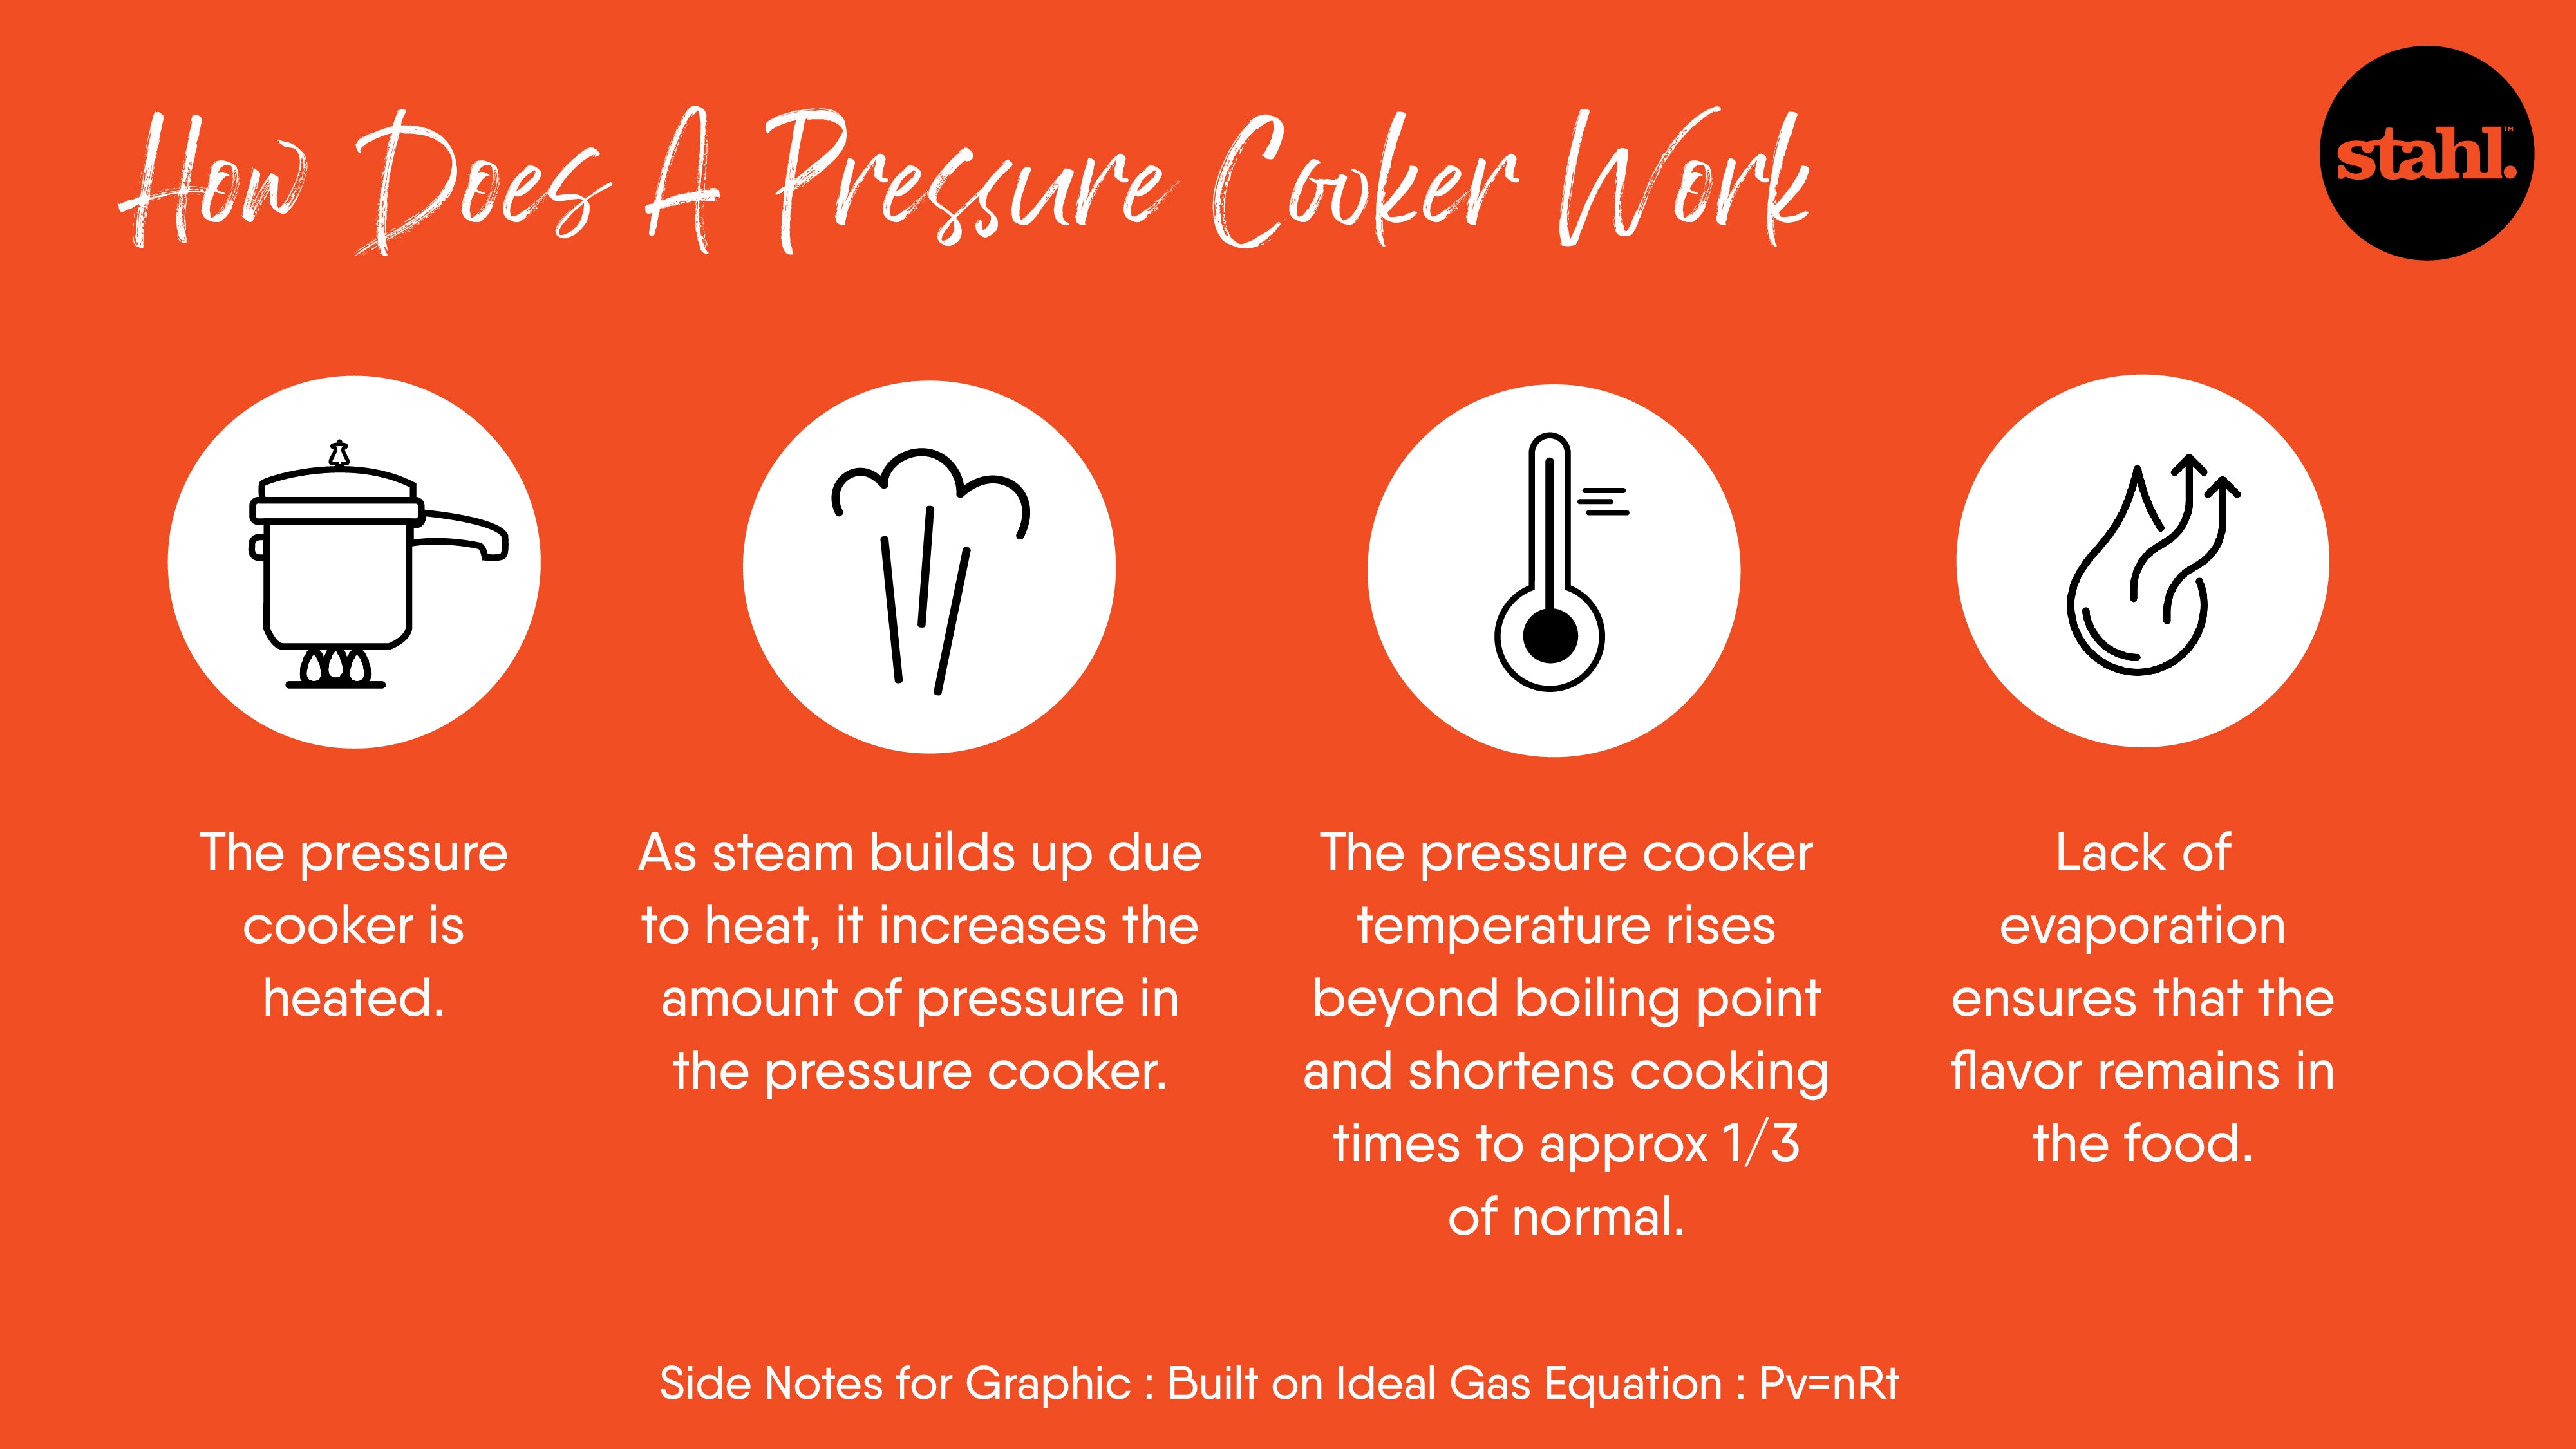 how does a pressure cooker work?